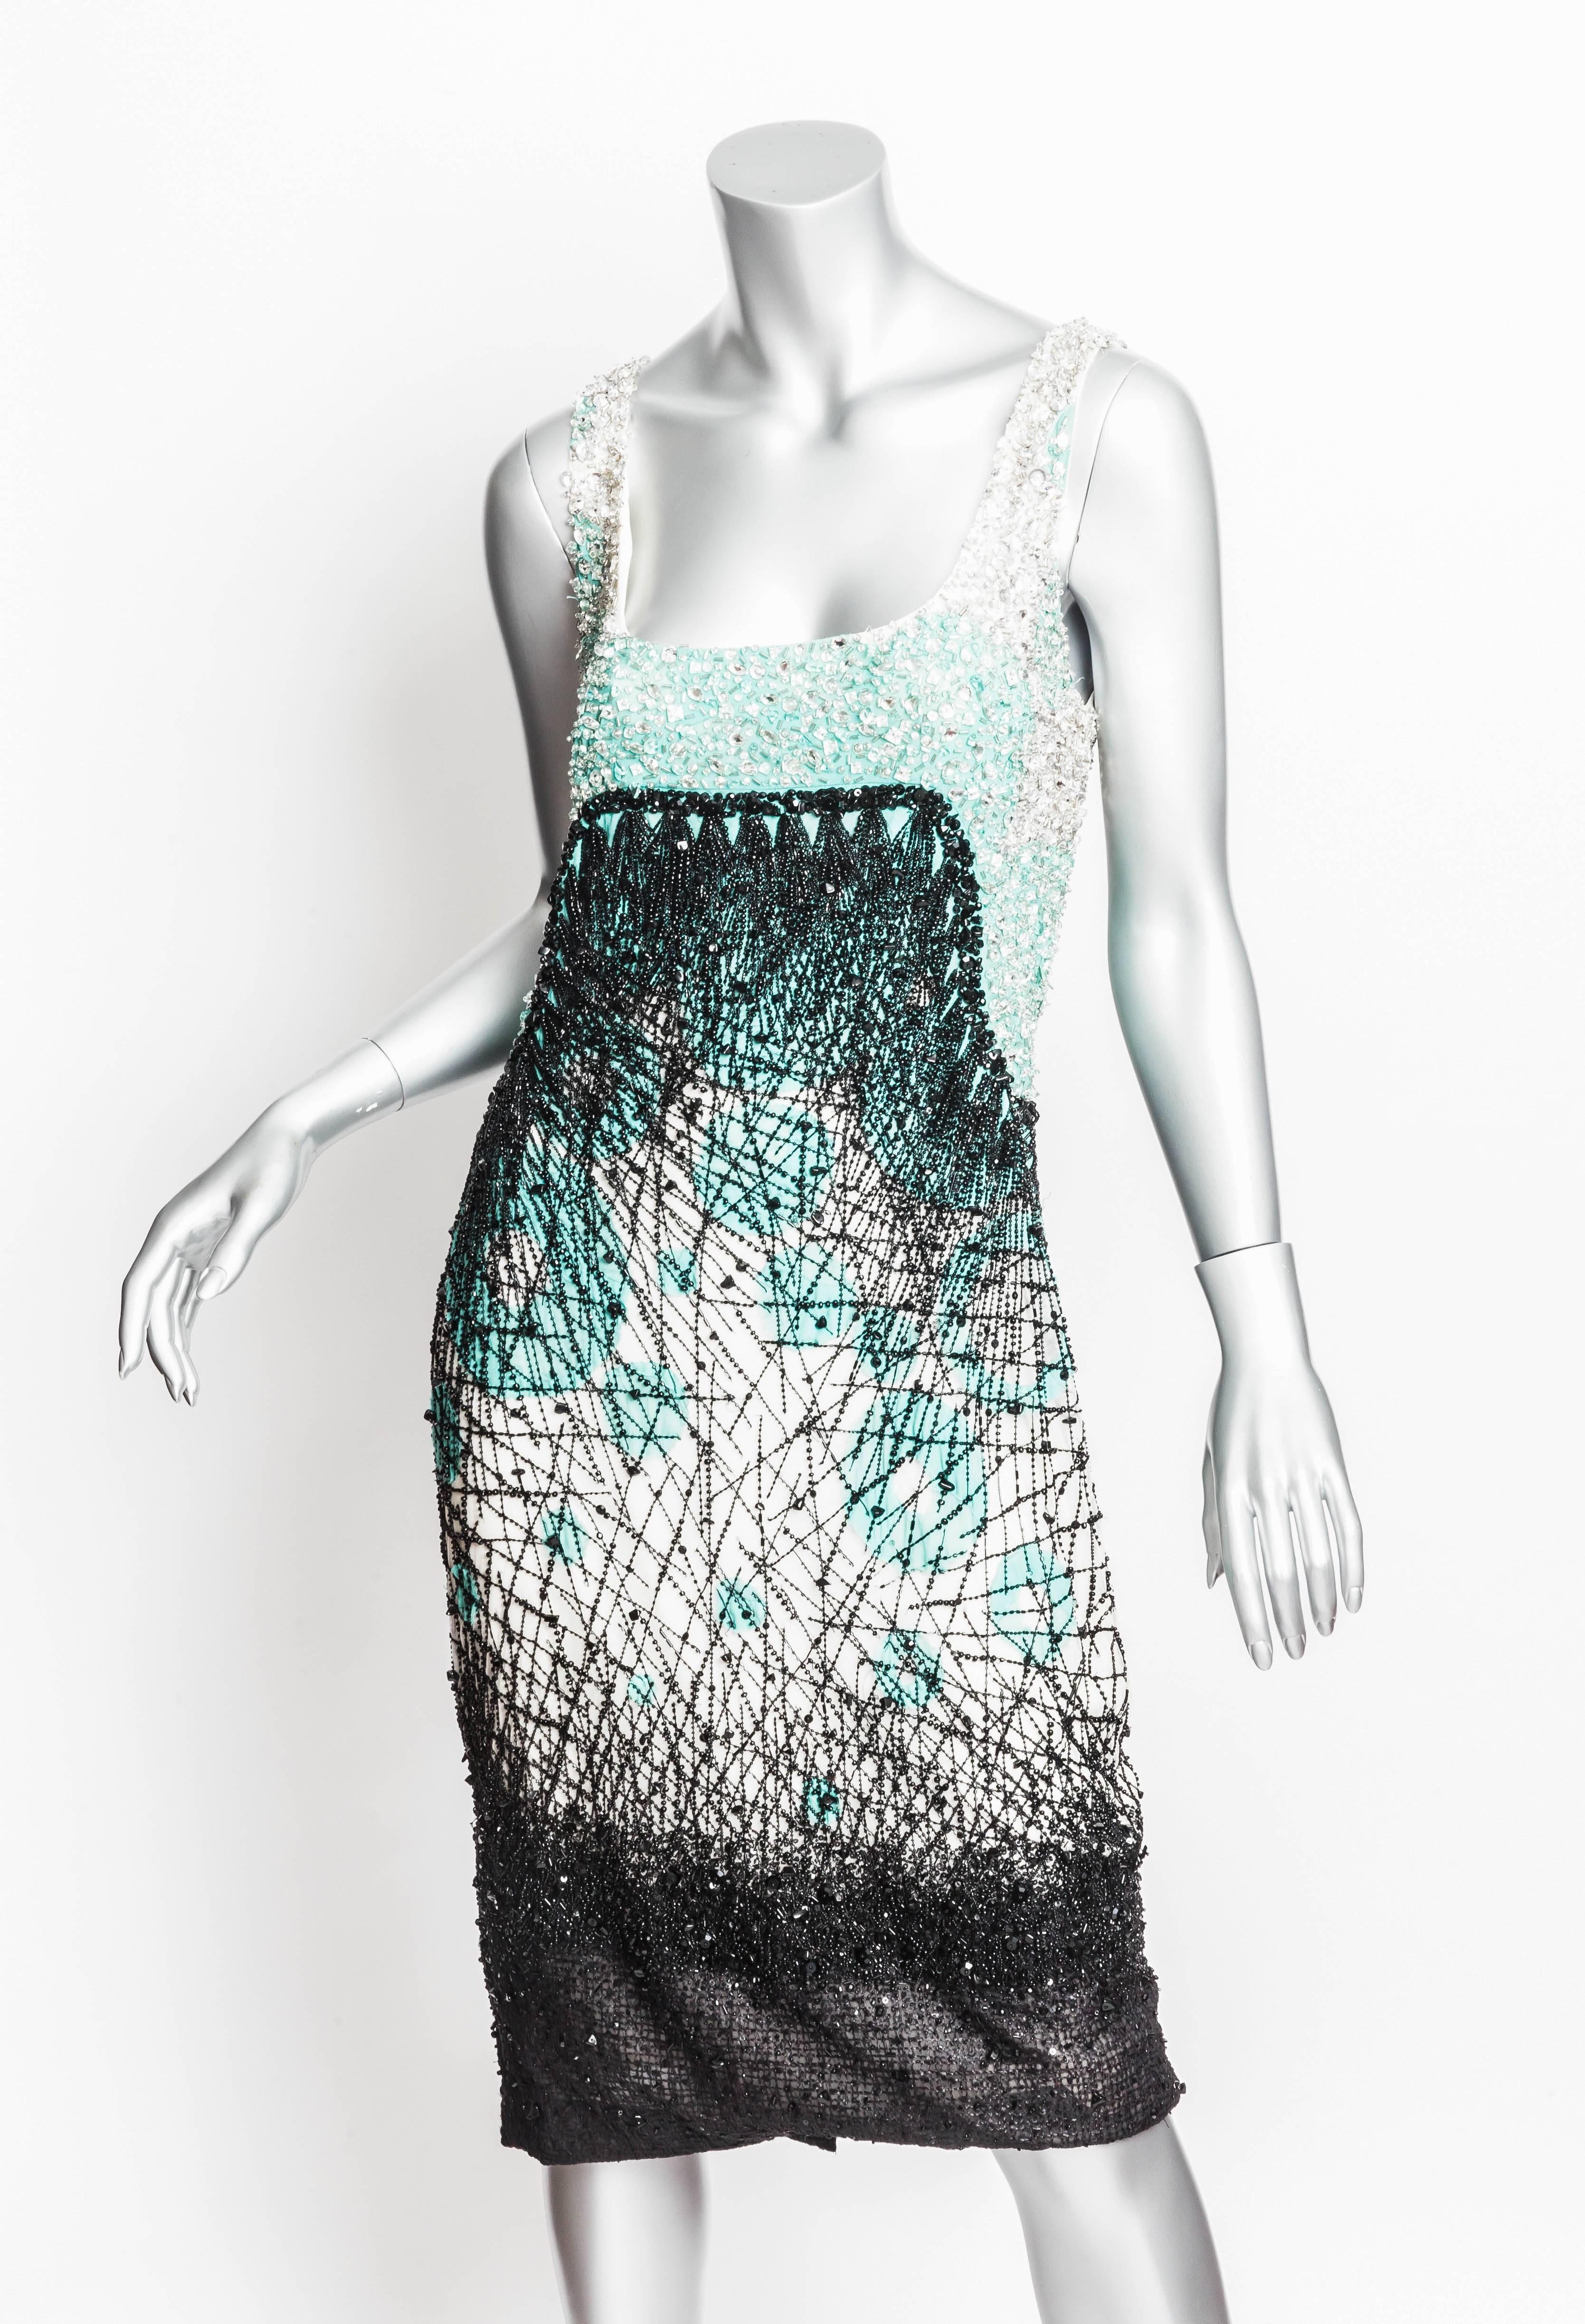 Breathtaking Carolina Herrera Silk Beaded Cocktail Dress.
In shades of sea foam green, cream and black, this heavily beaded dress is embellished with faceted crystals and sequins.
